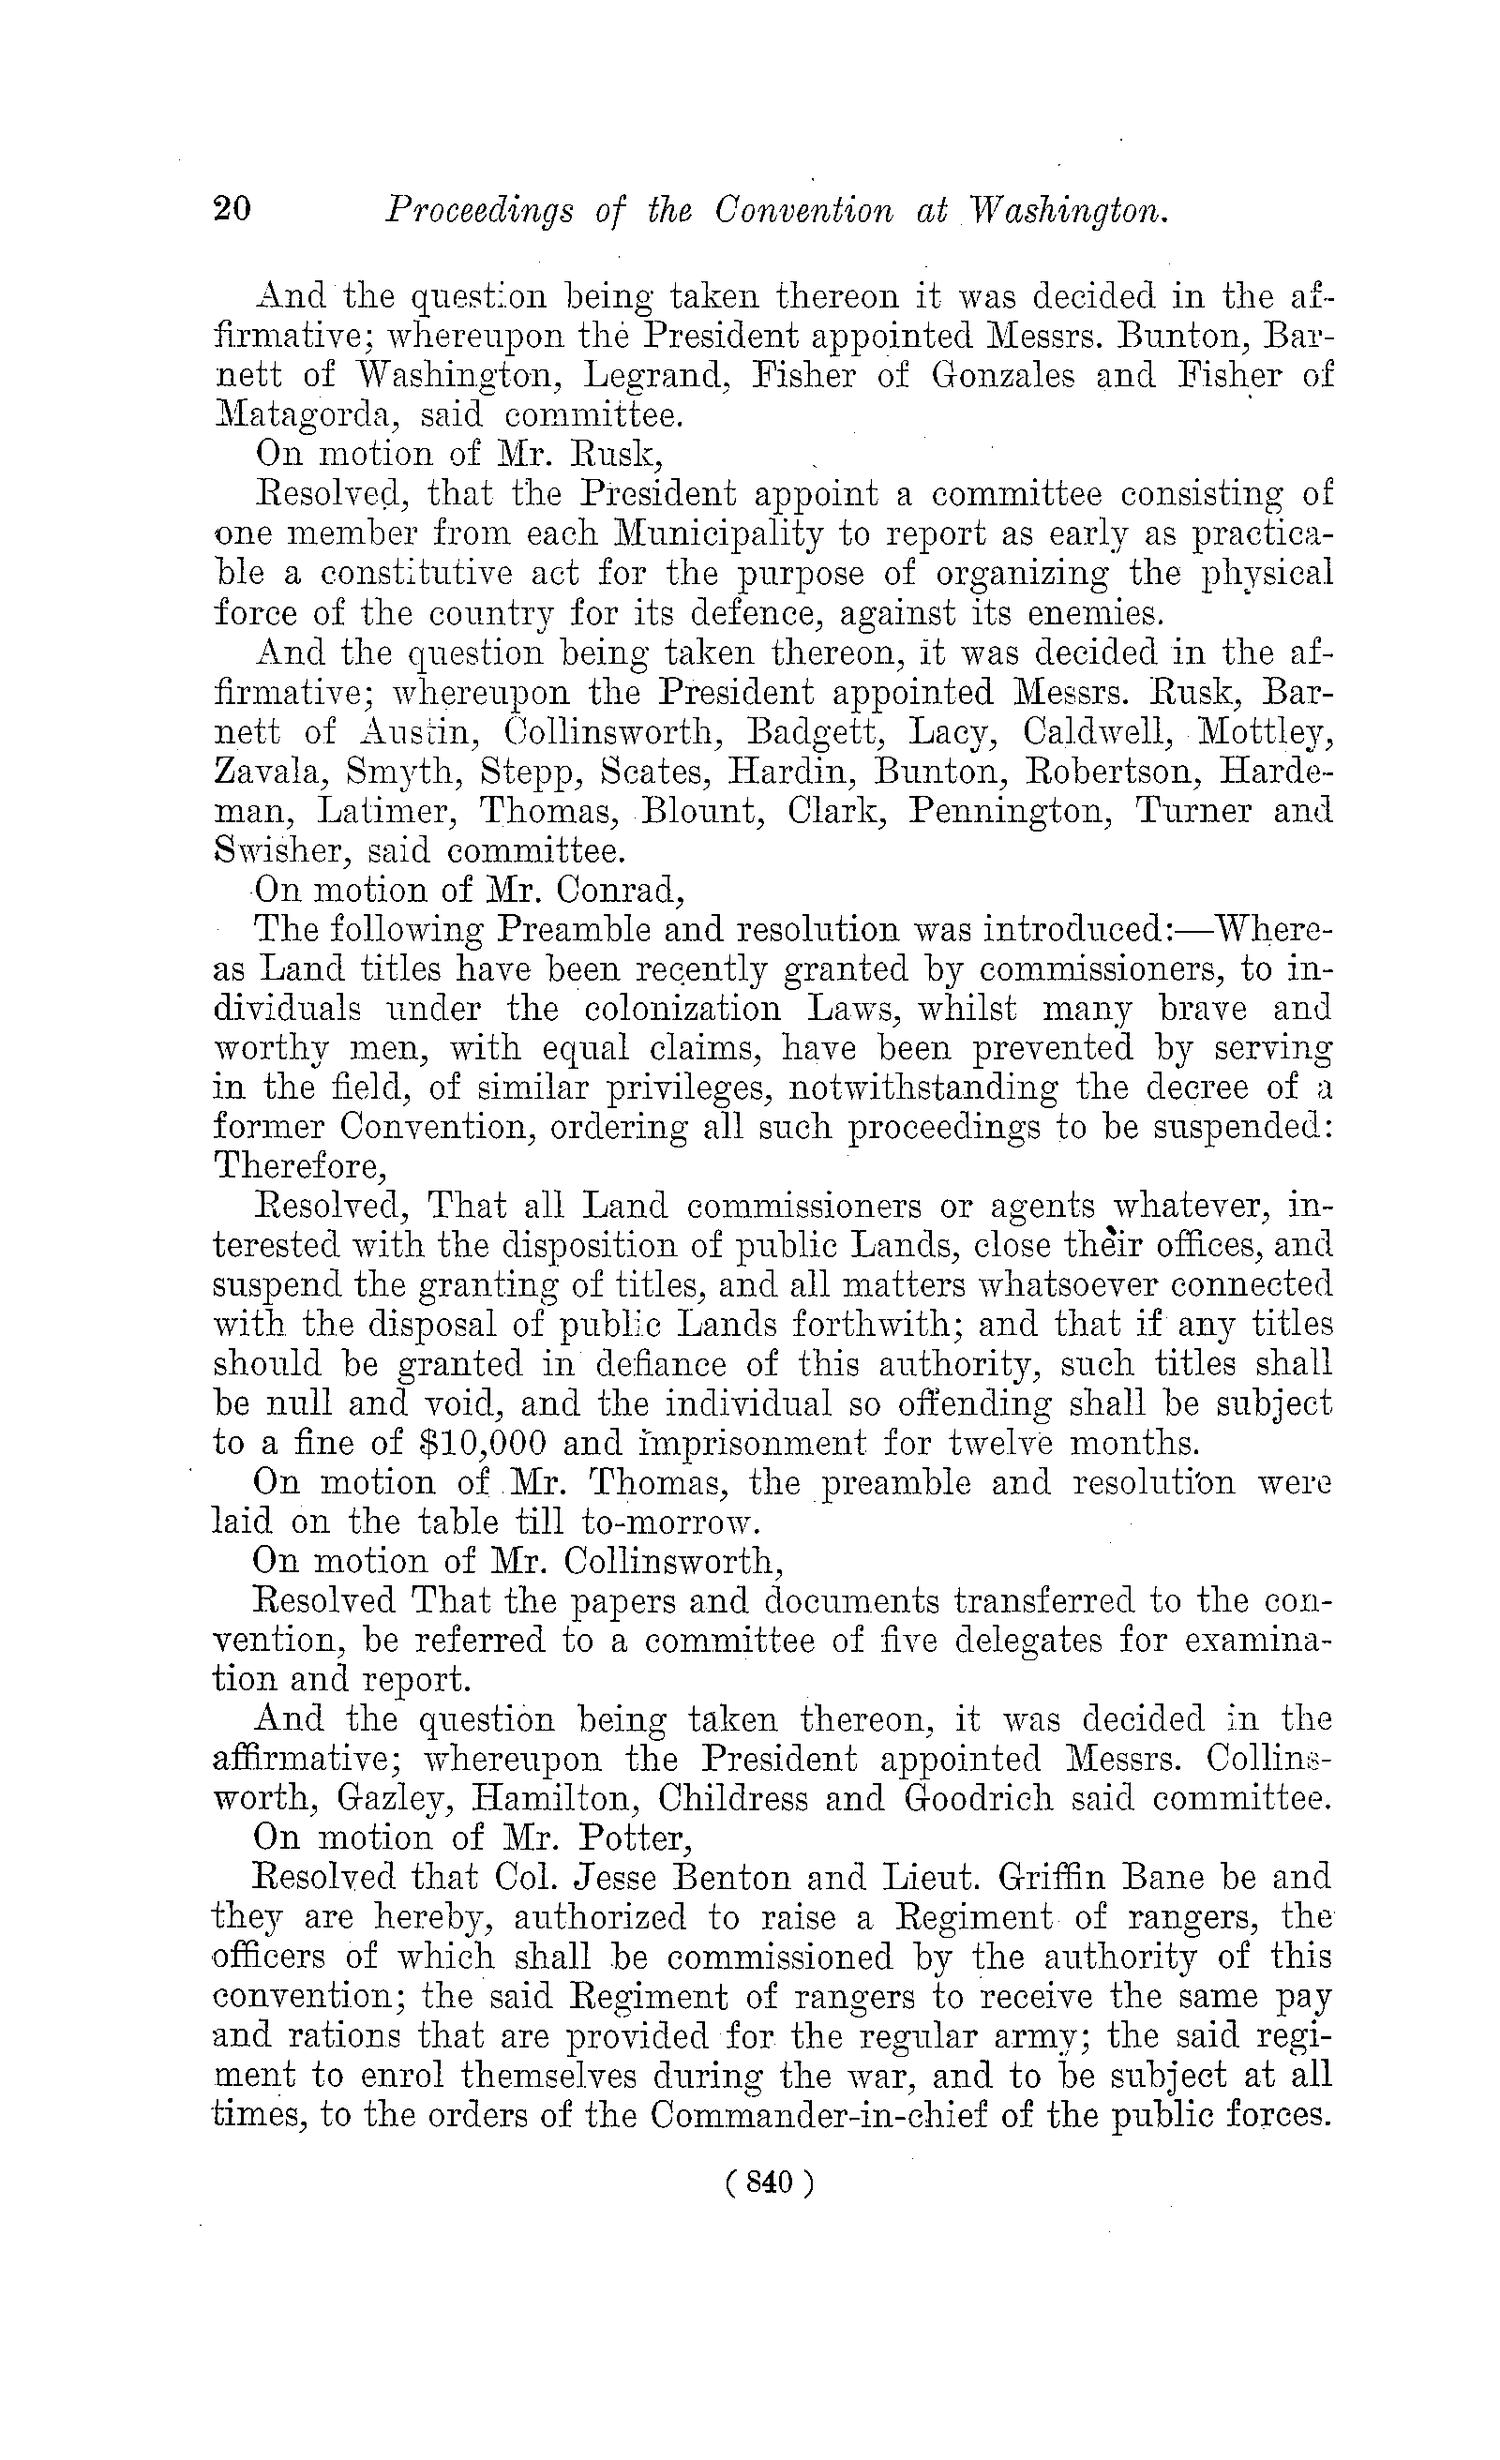 The Laws of Texas, 1822-1897 Volume 1
                                                
                                                    840
                                                